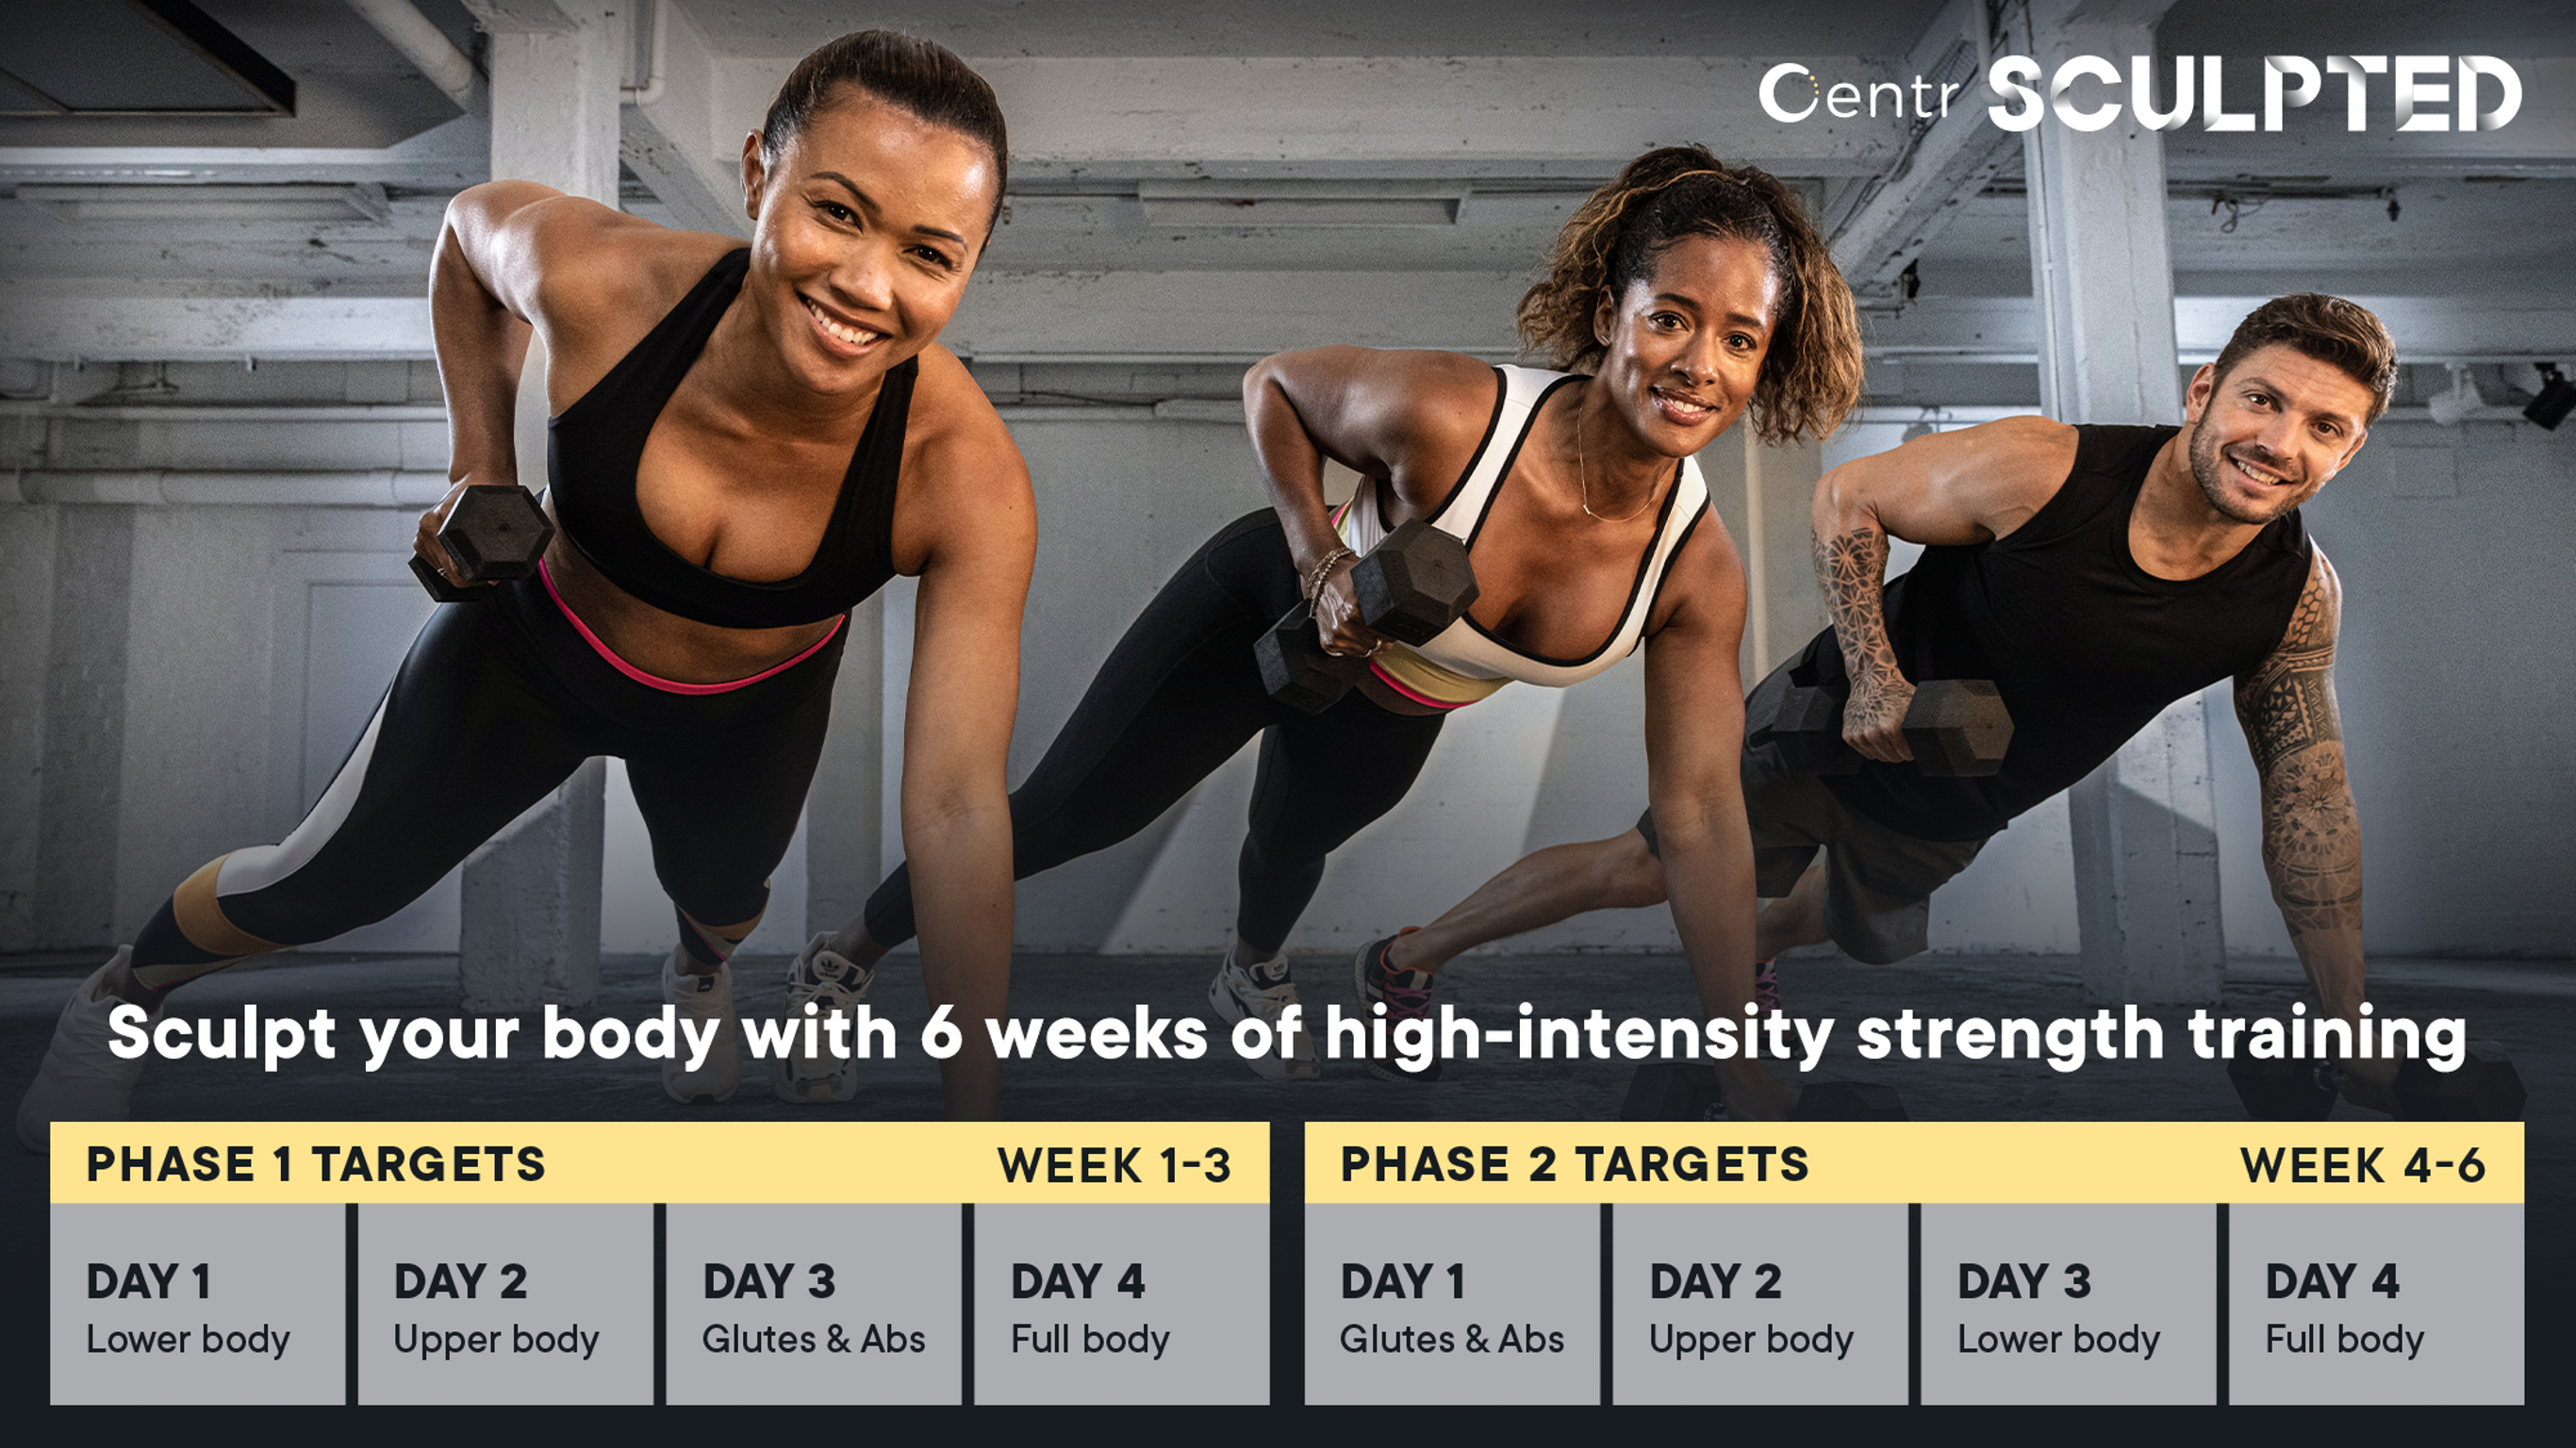 For a high-intensity strength and conditioning workout